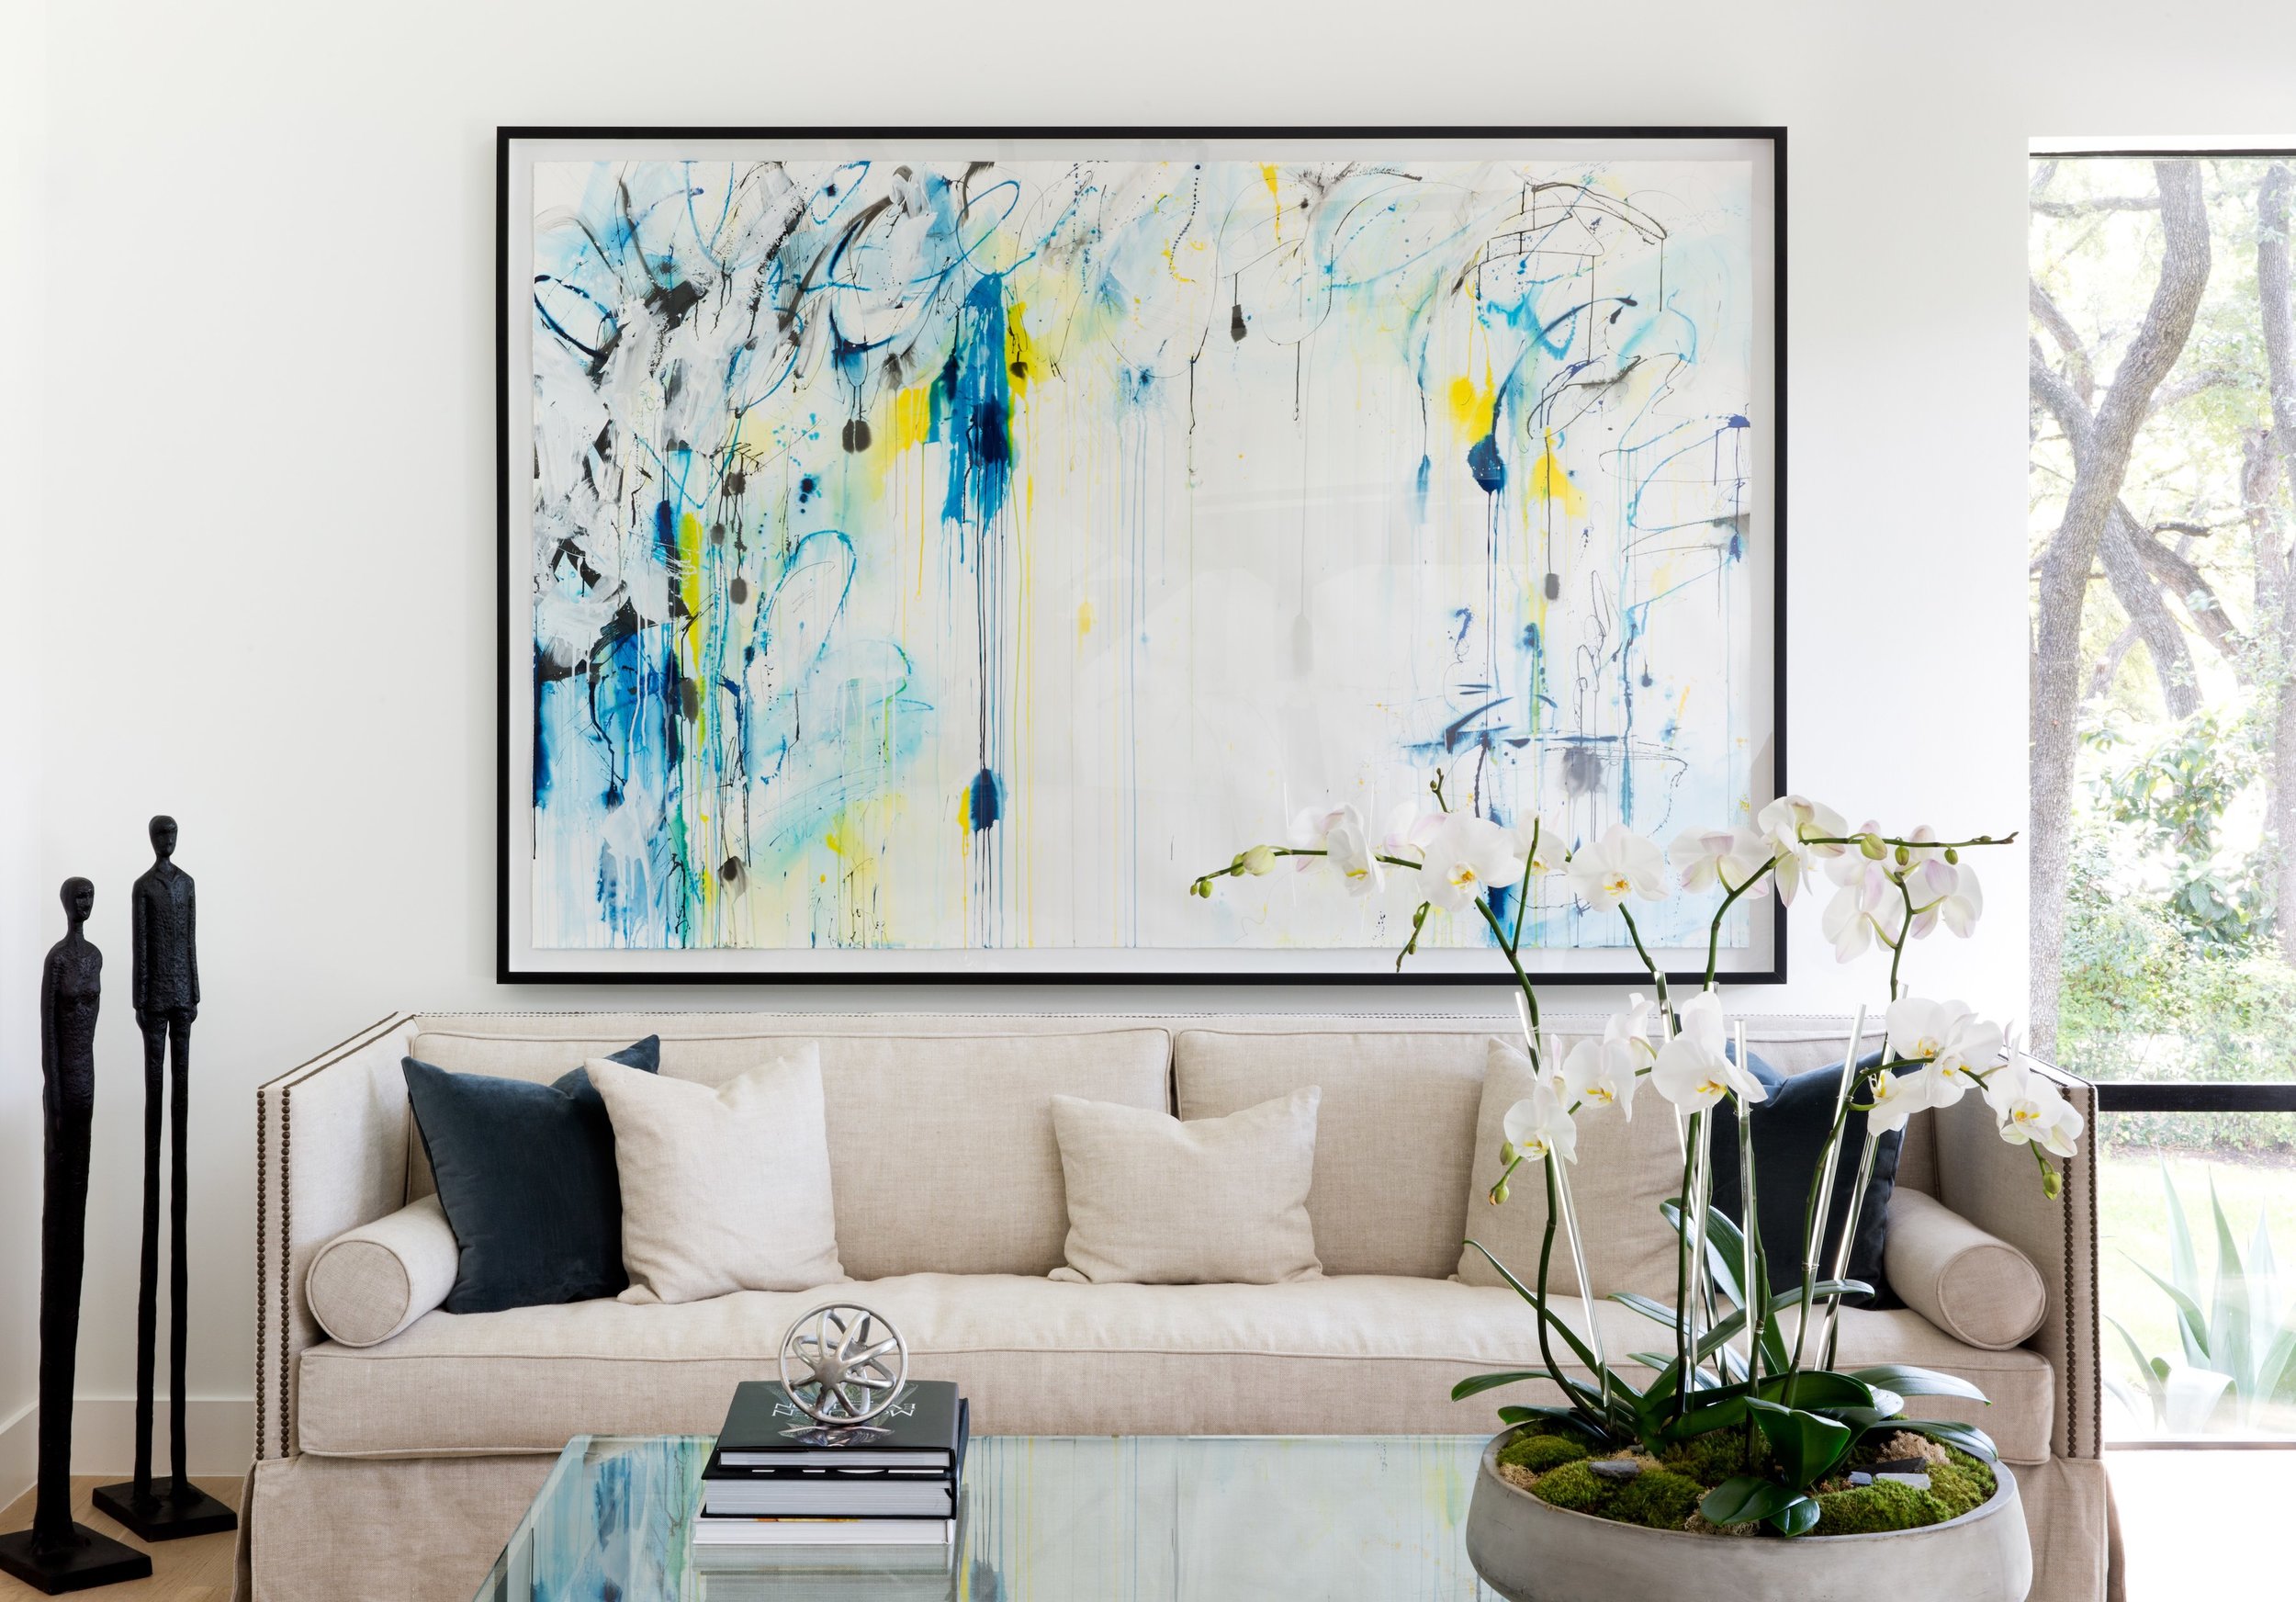  commissioned for private residence in Austin, TX   photo courtesy of  Alicia Emr Art Advisory     